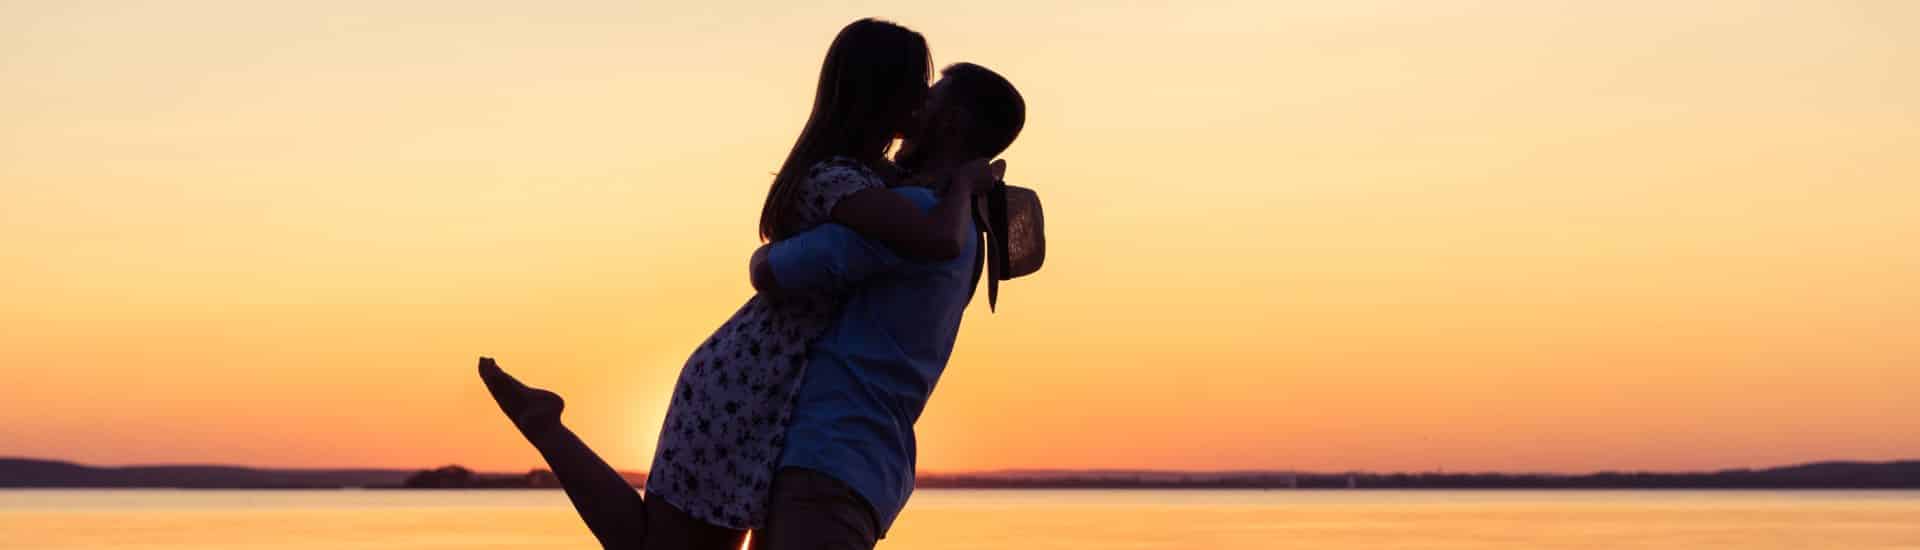 A man and woman embracing at sunset by a body of water